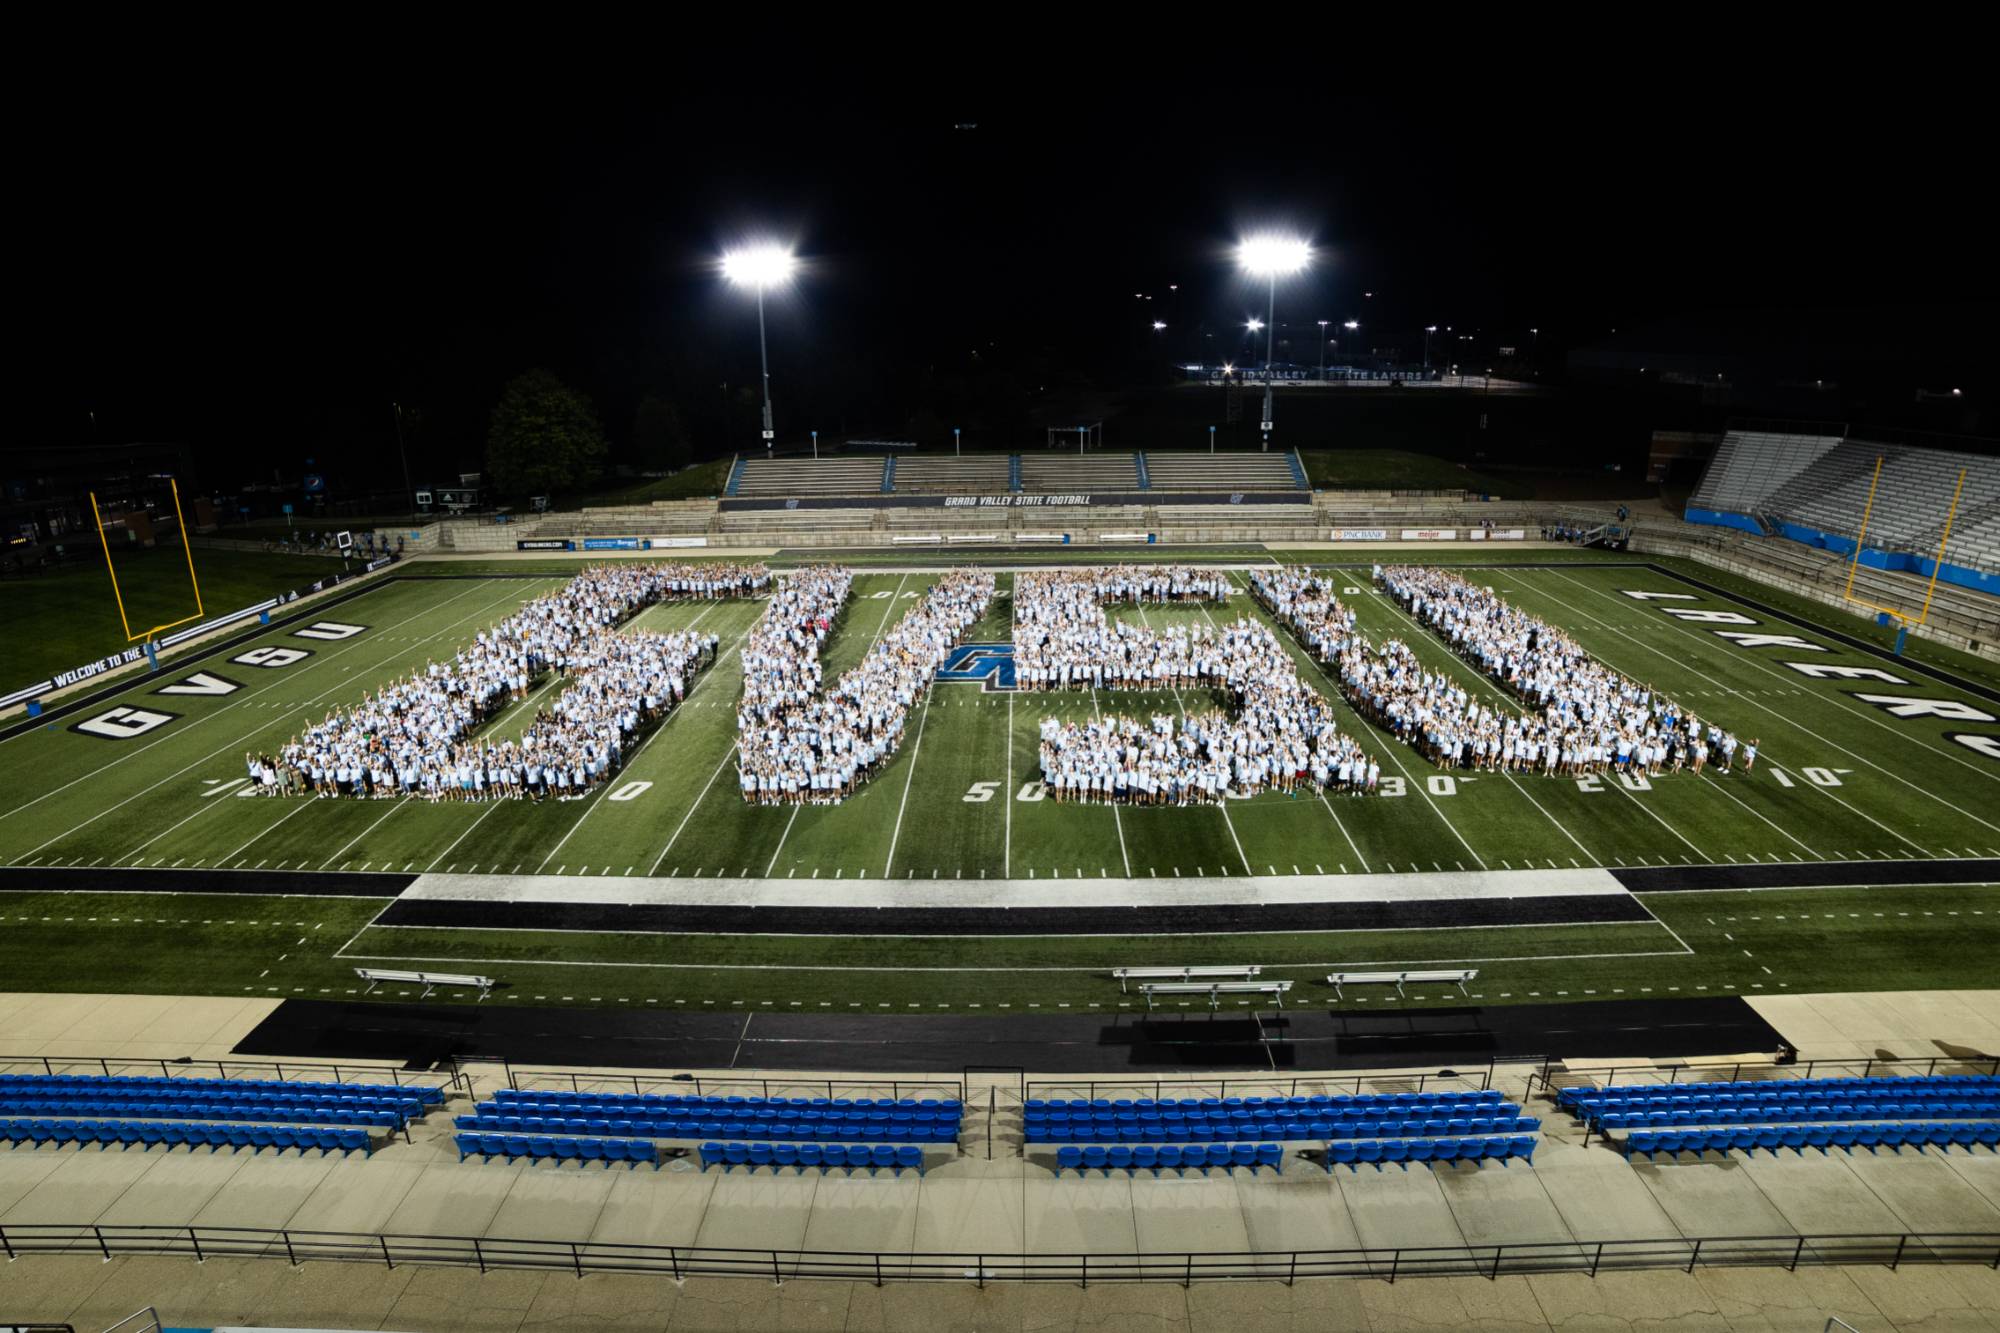 Class of 2026 class photo - students assembled on the football field to form the shape of the GVSU letters